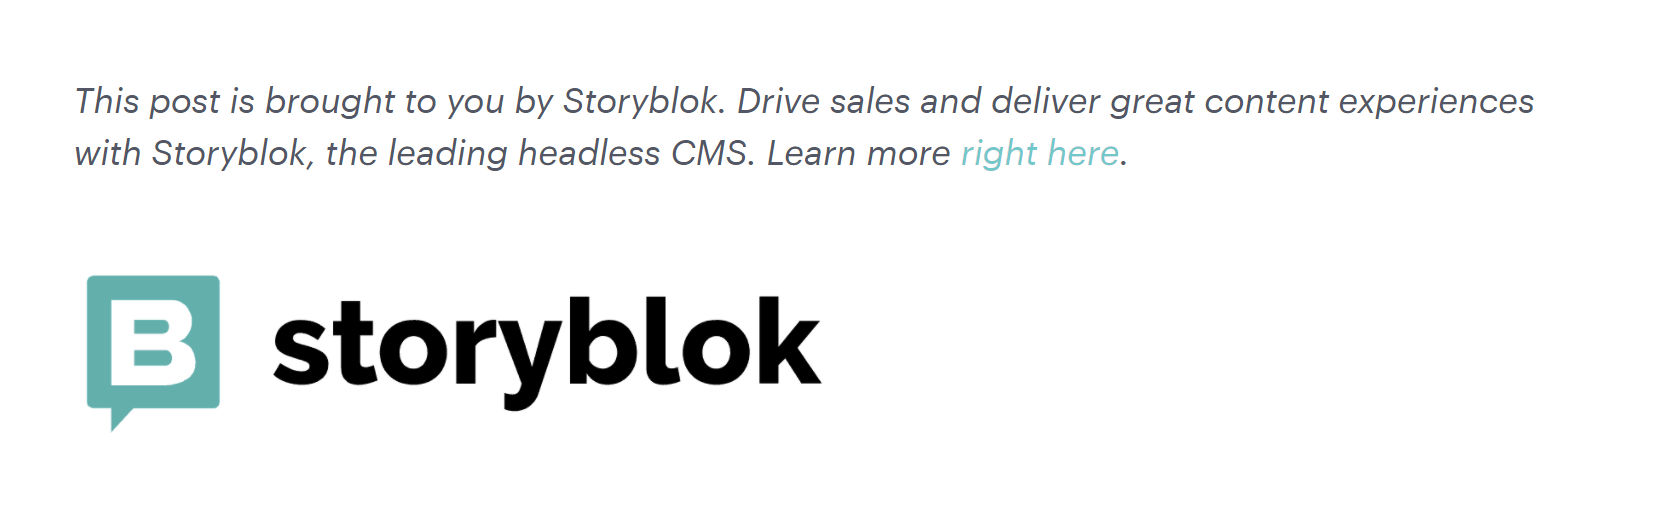 Screenshot of Storyblok sponsorship note from the bottom of the post.